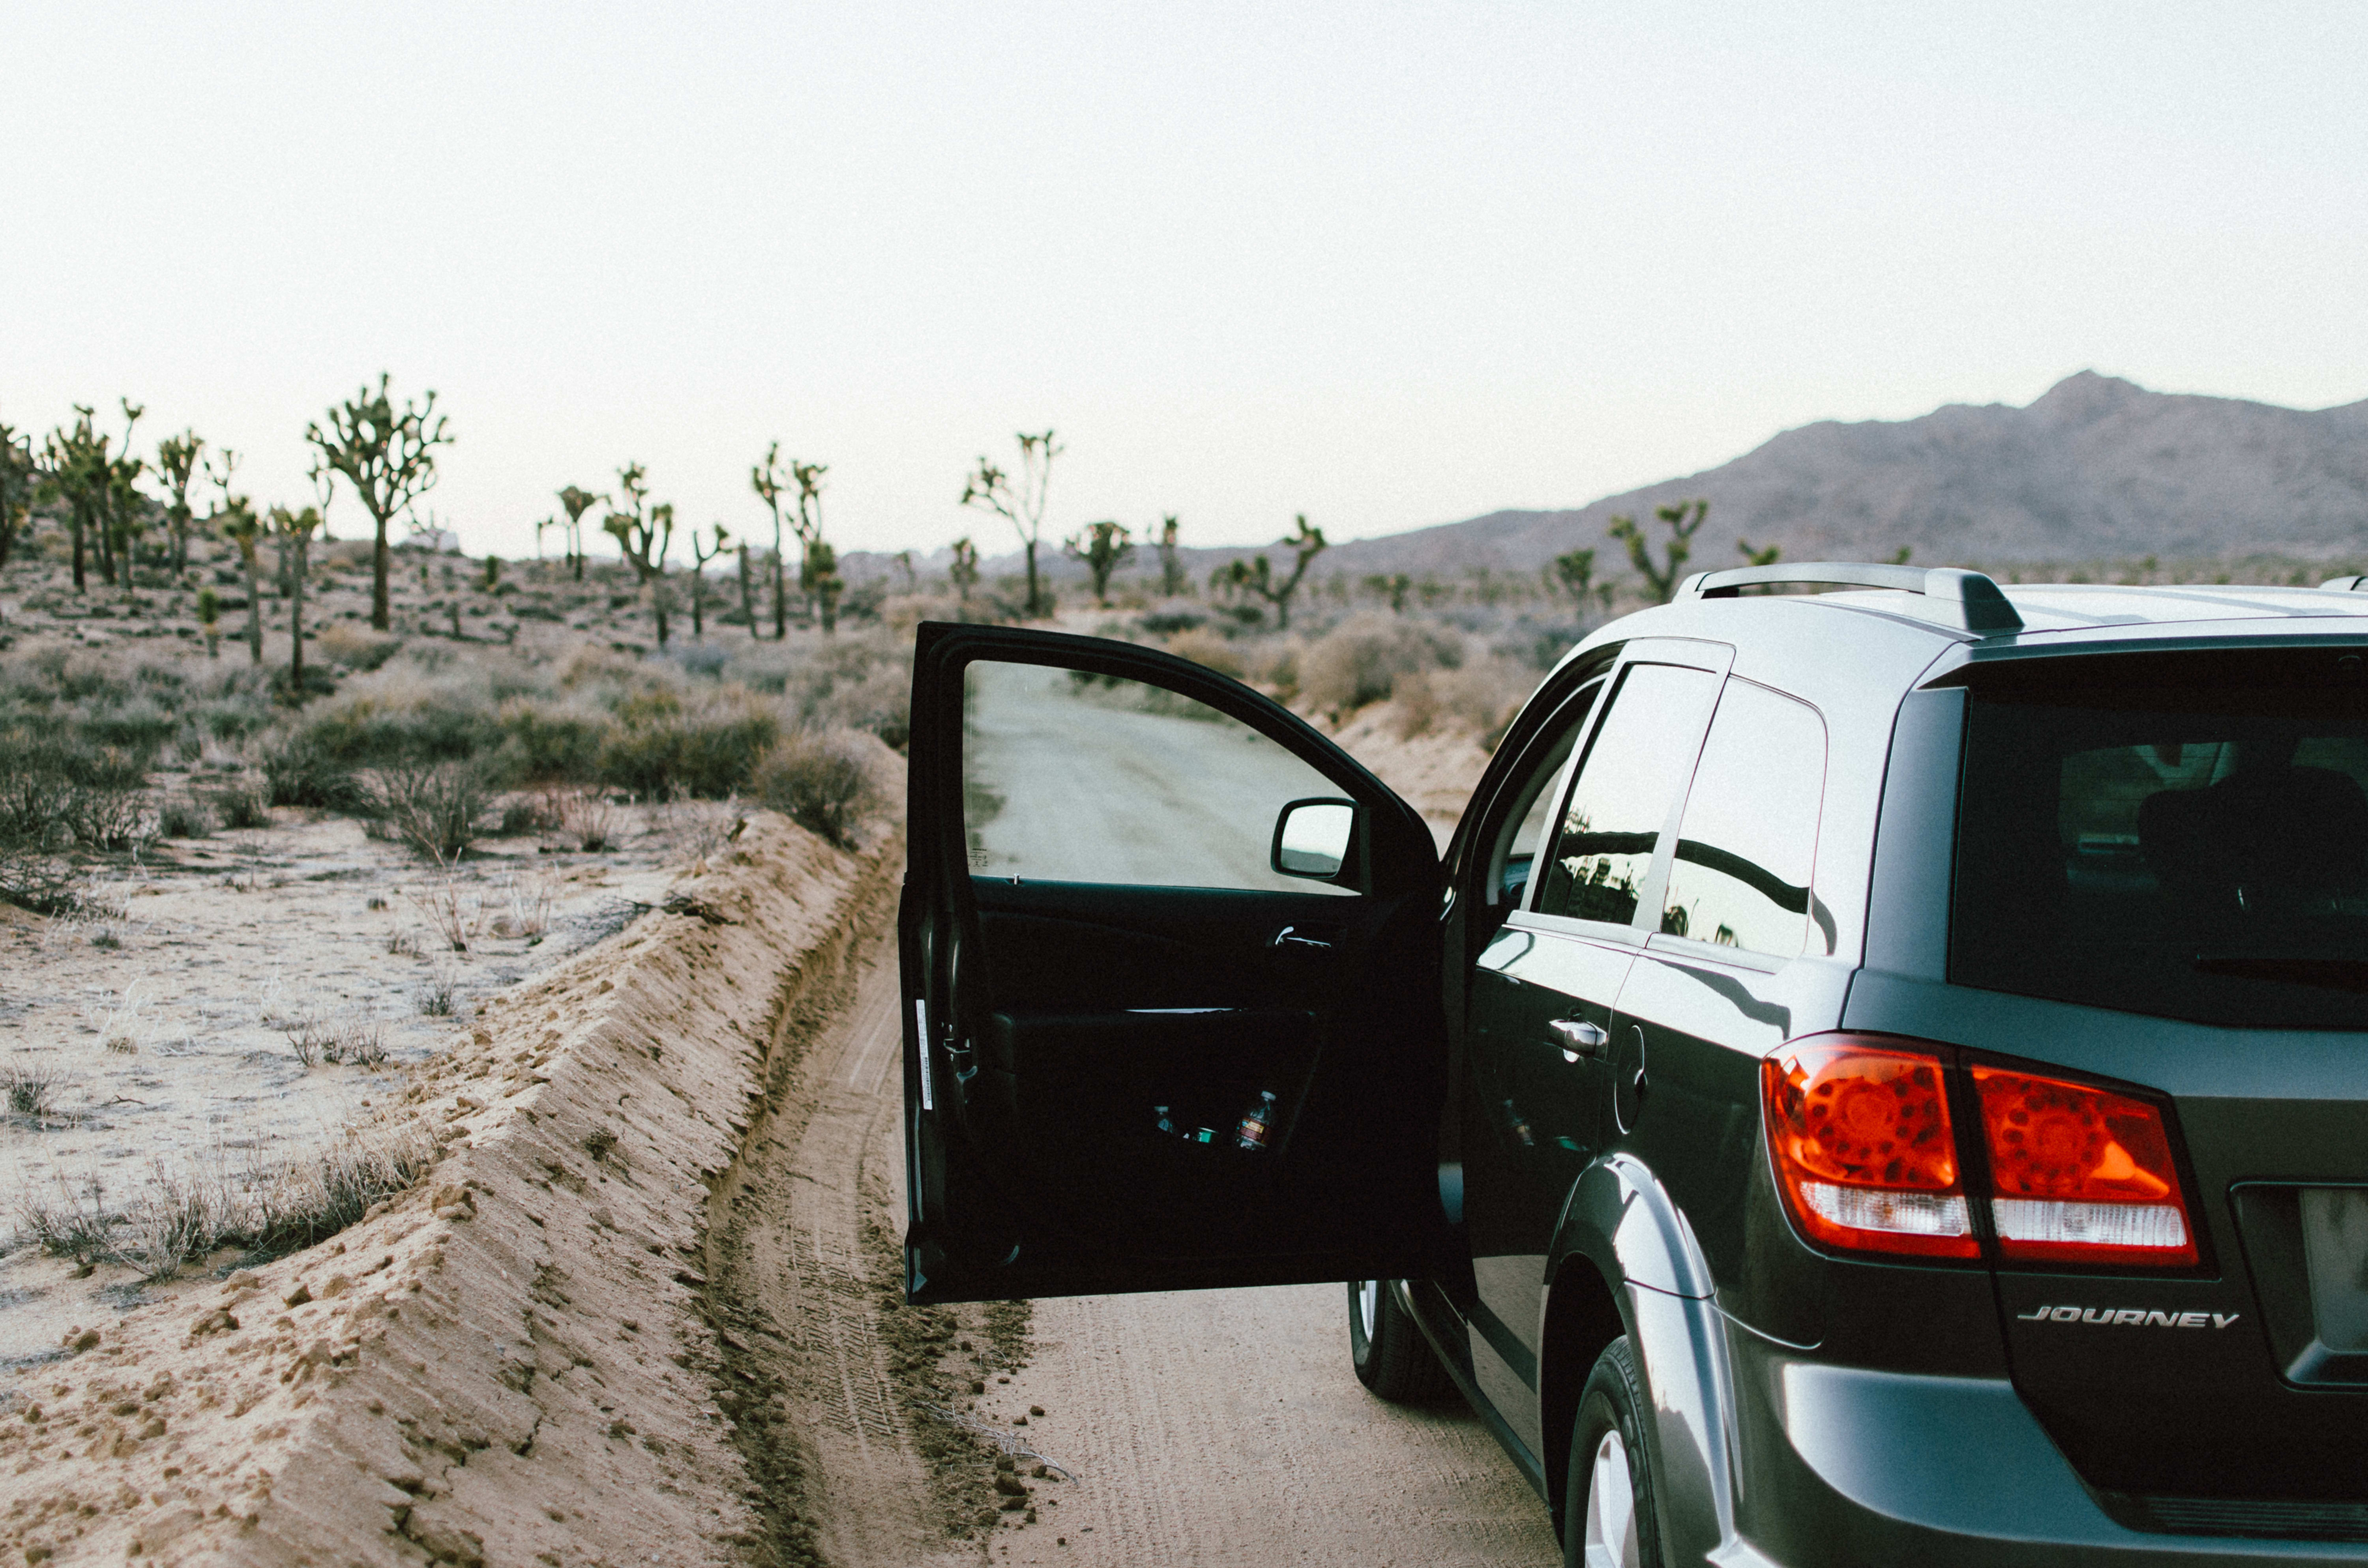 You can avoid sleeping in your car at Joshua Tree and avoid a citation with these tips